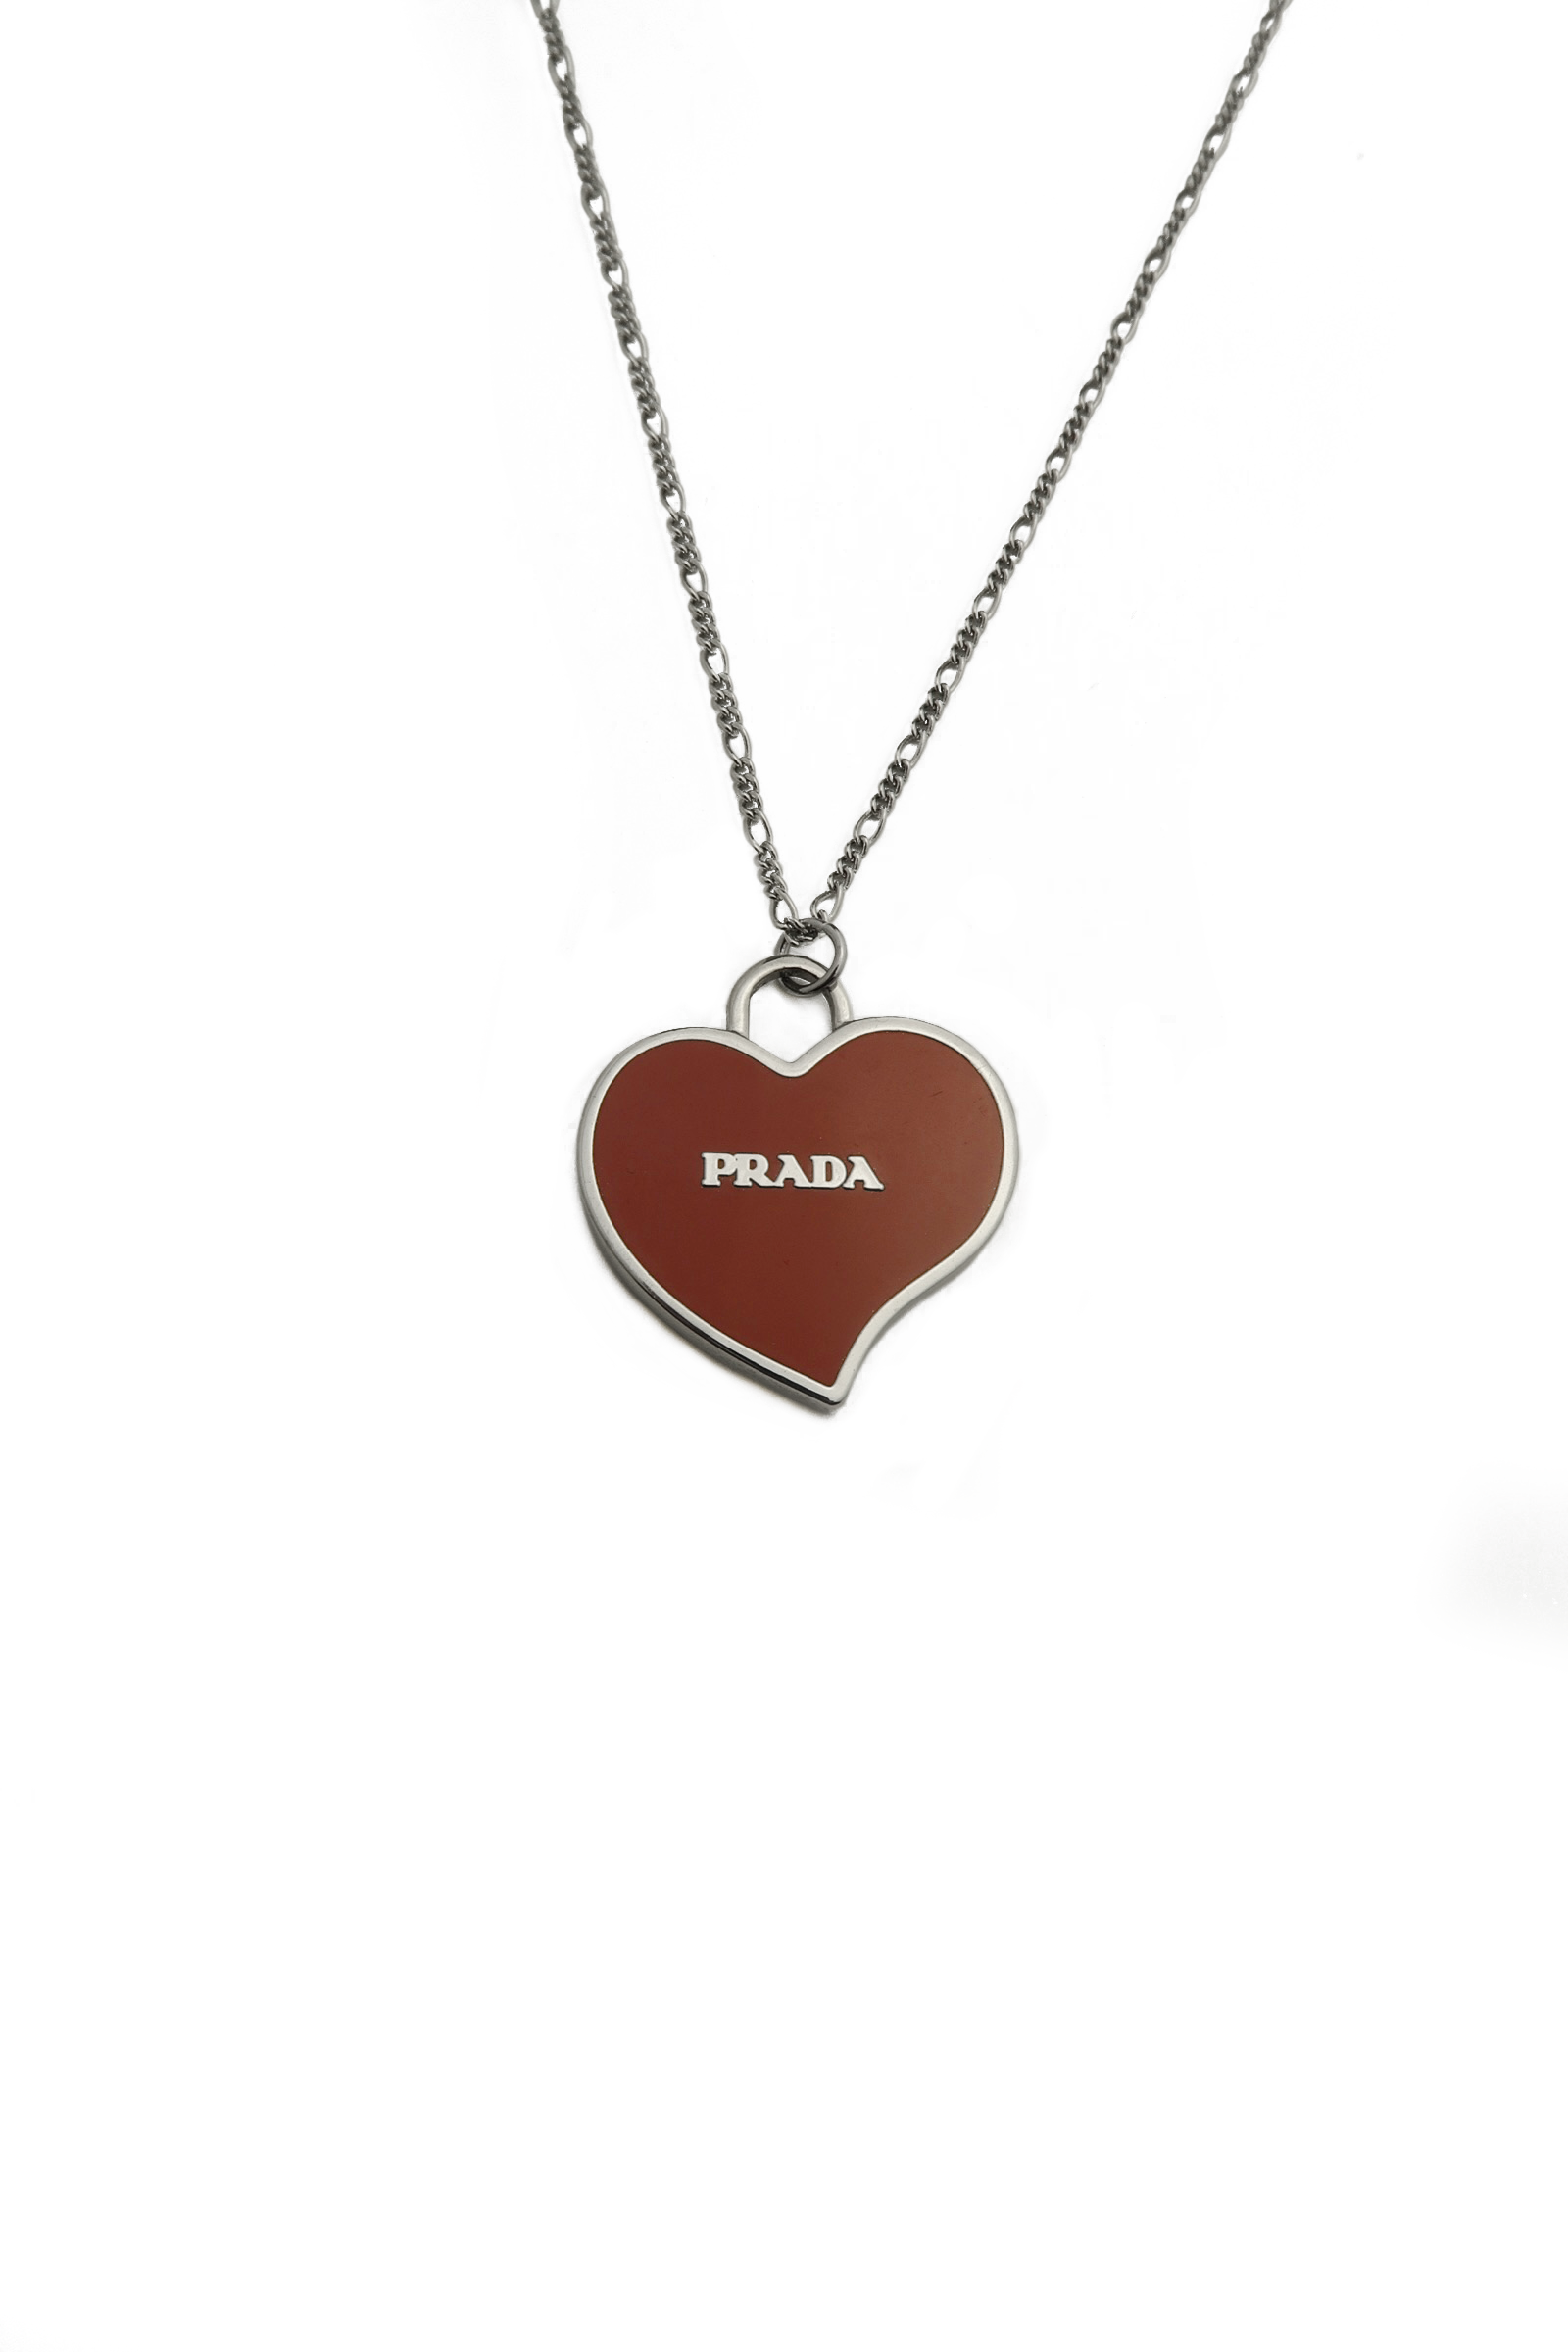 GOLDEN HOUR CO. on Instagram: “The @goldhourco Prada triangle tag necklace  originates from an authentic P… | Women's jewelry and accessories, Necklace,  Tag necklace